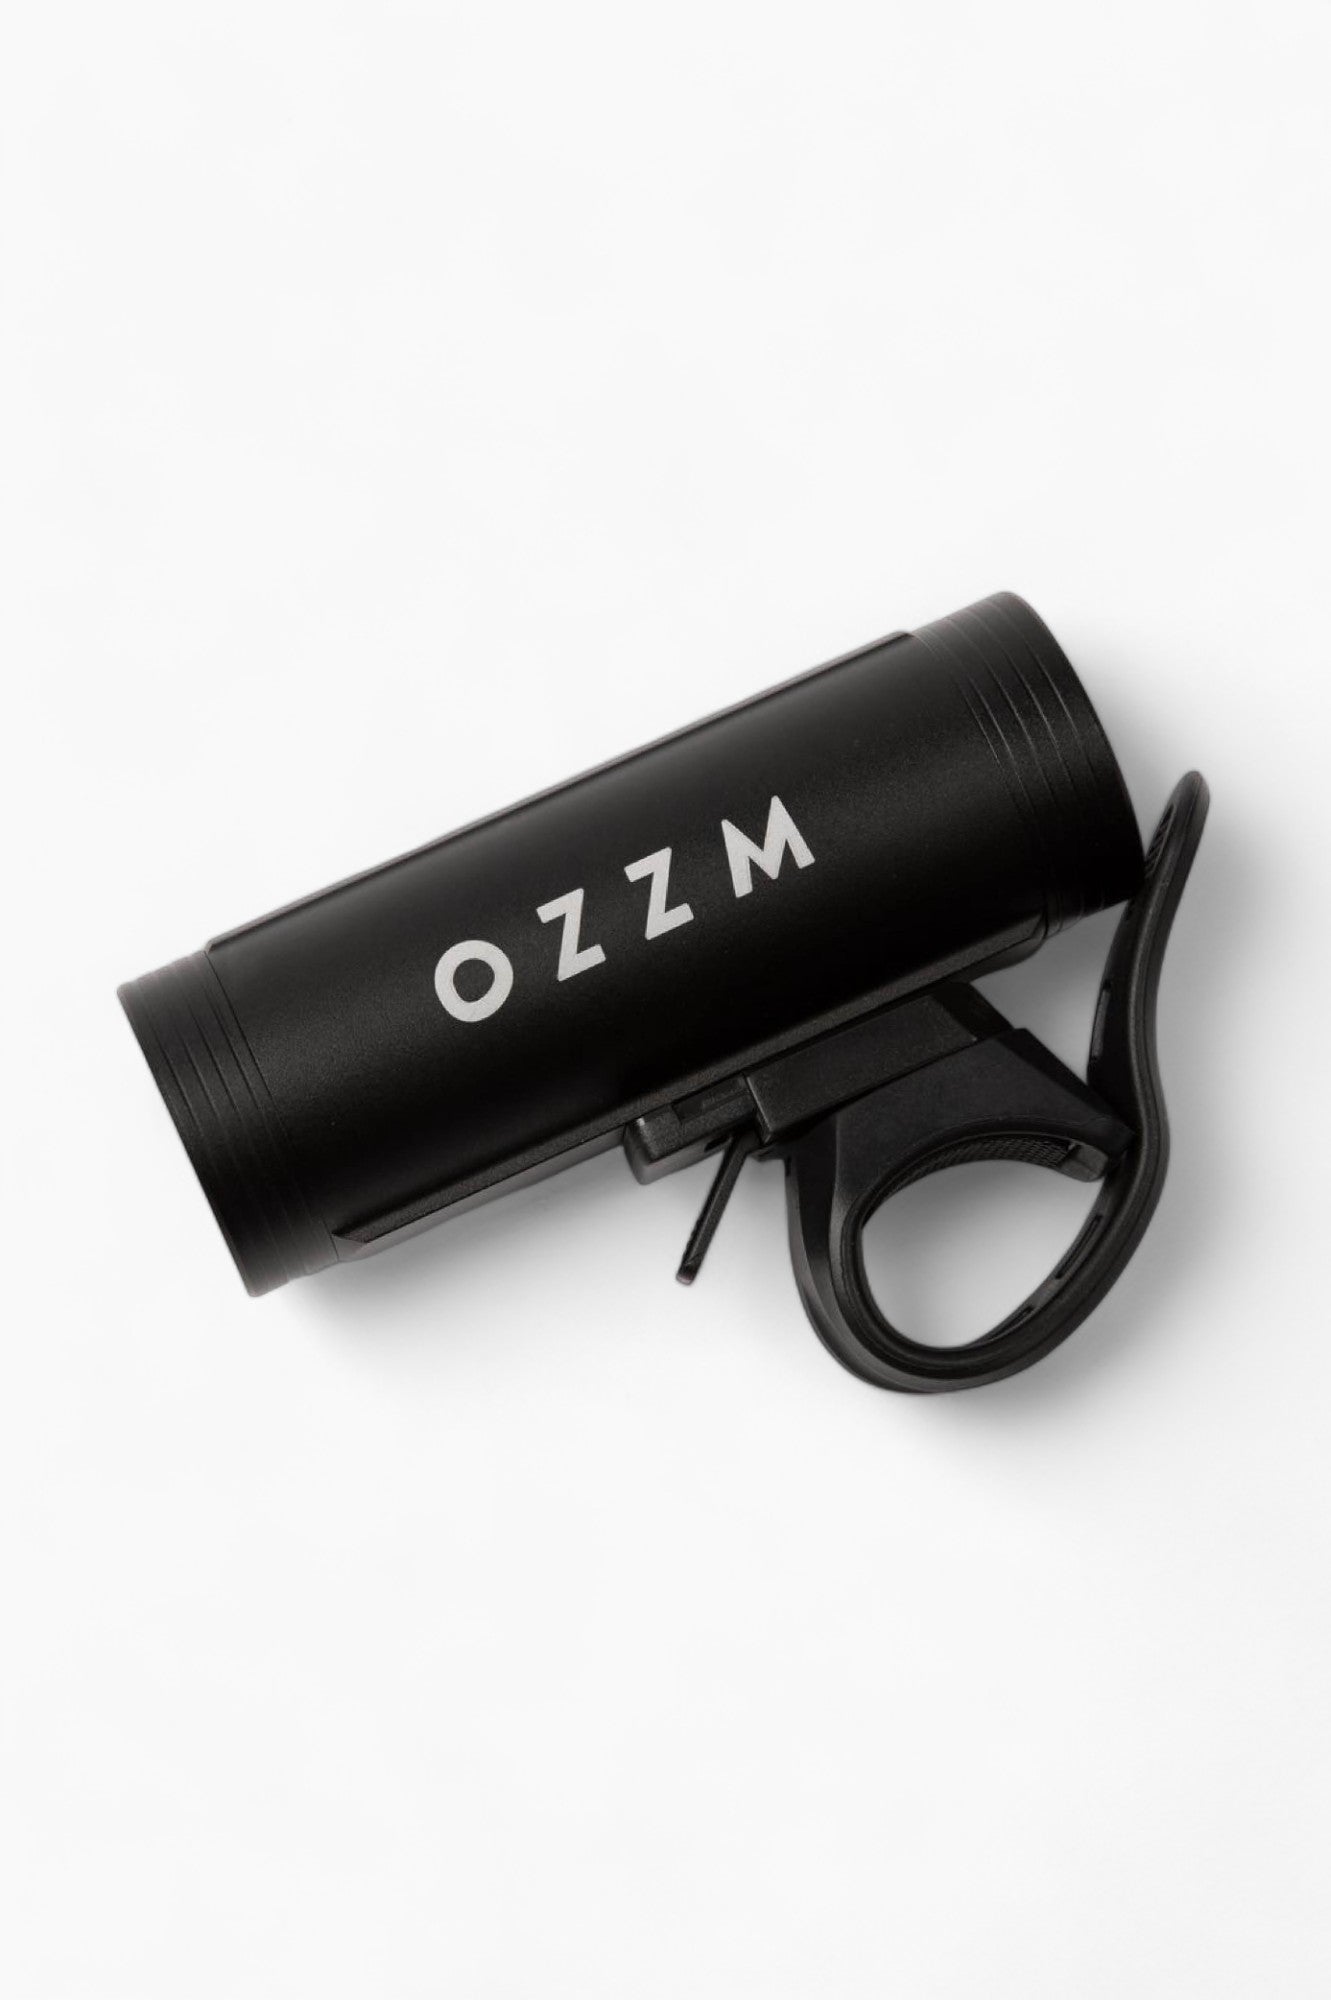 OZZM Bike Lights (Front and Back)